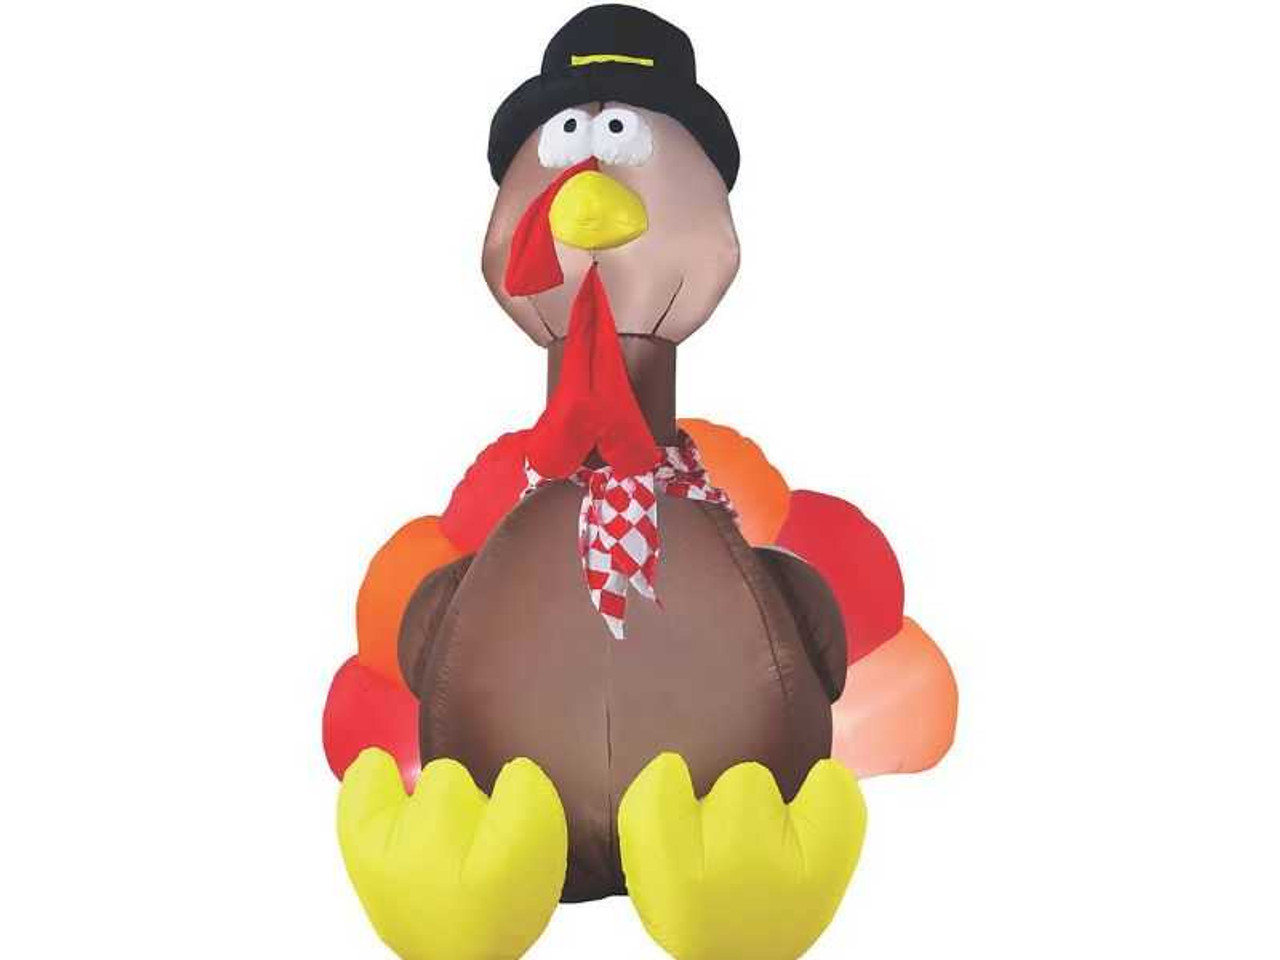 72" Blow Up Inflatable Turkey with Lights